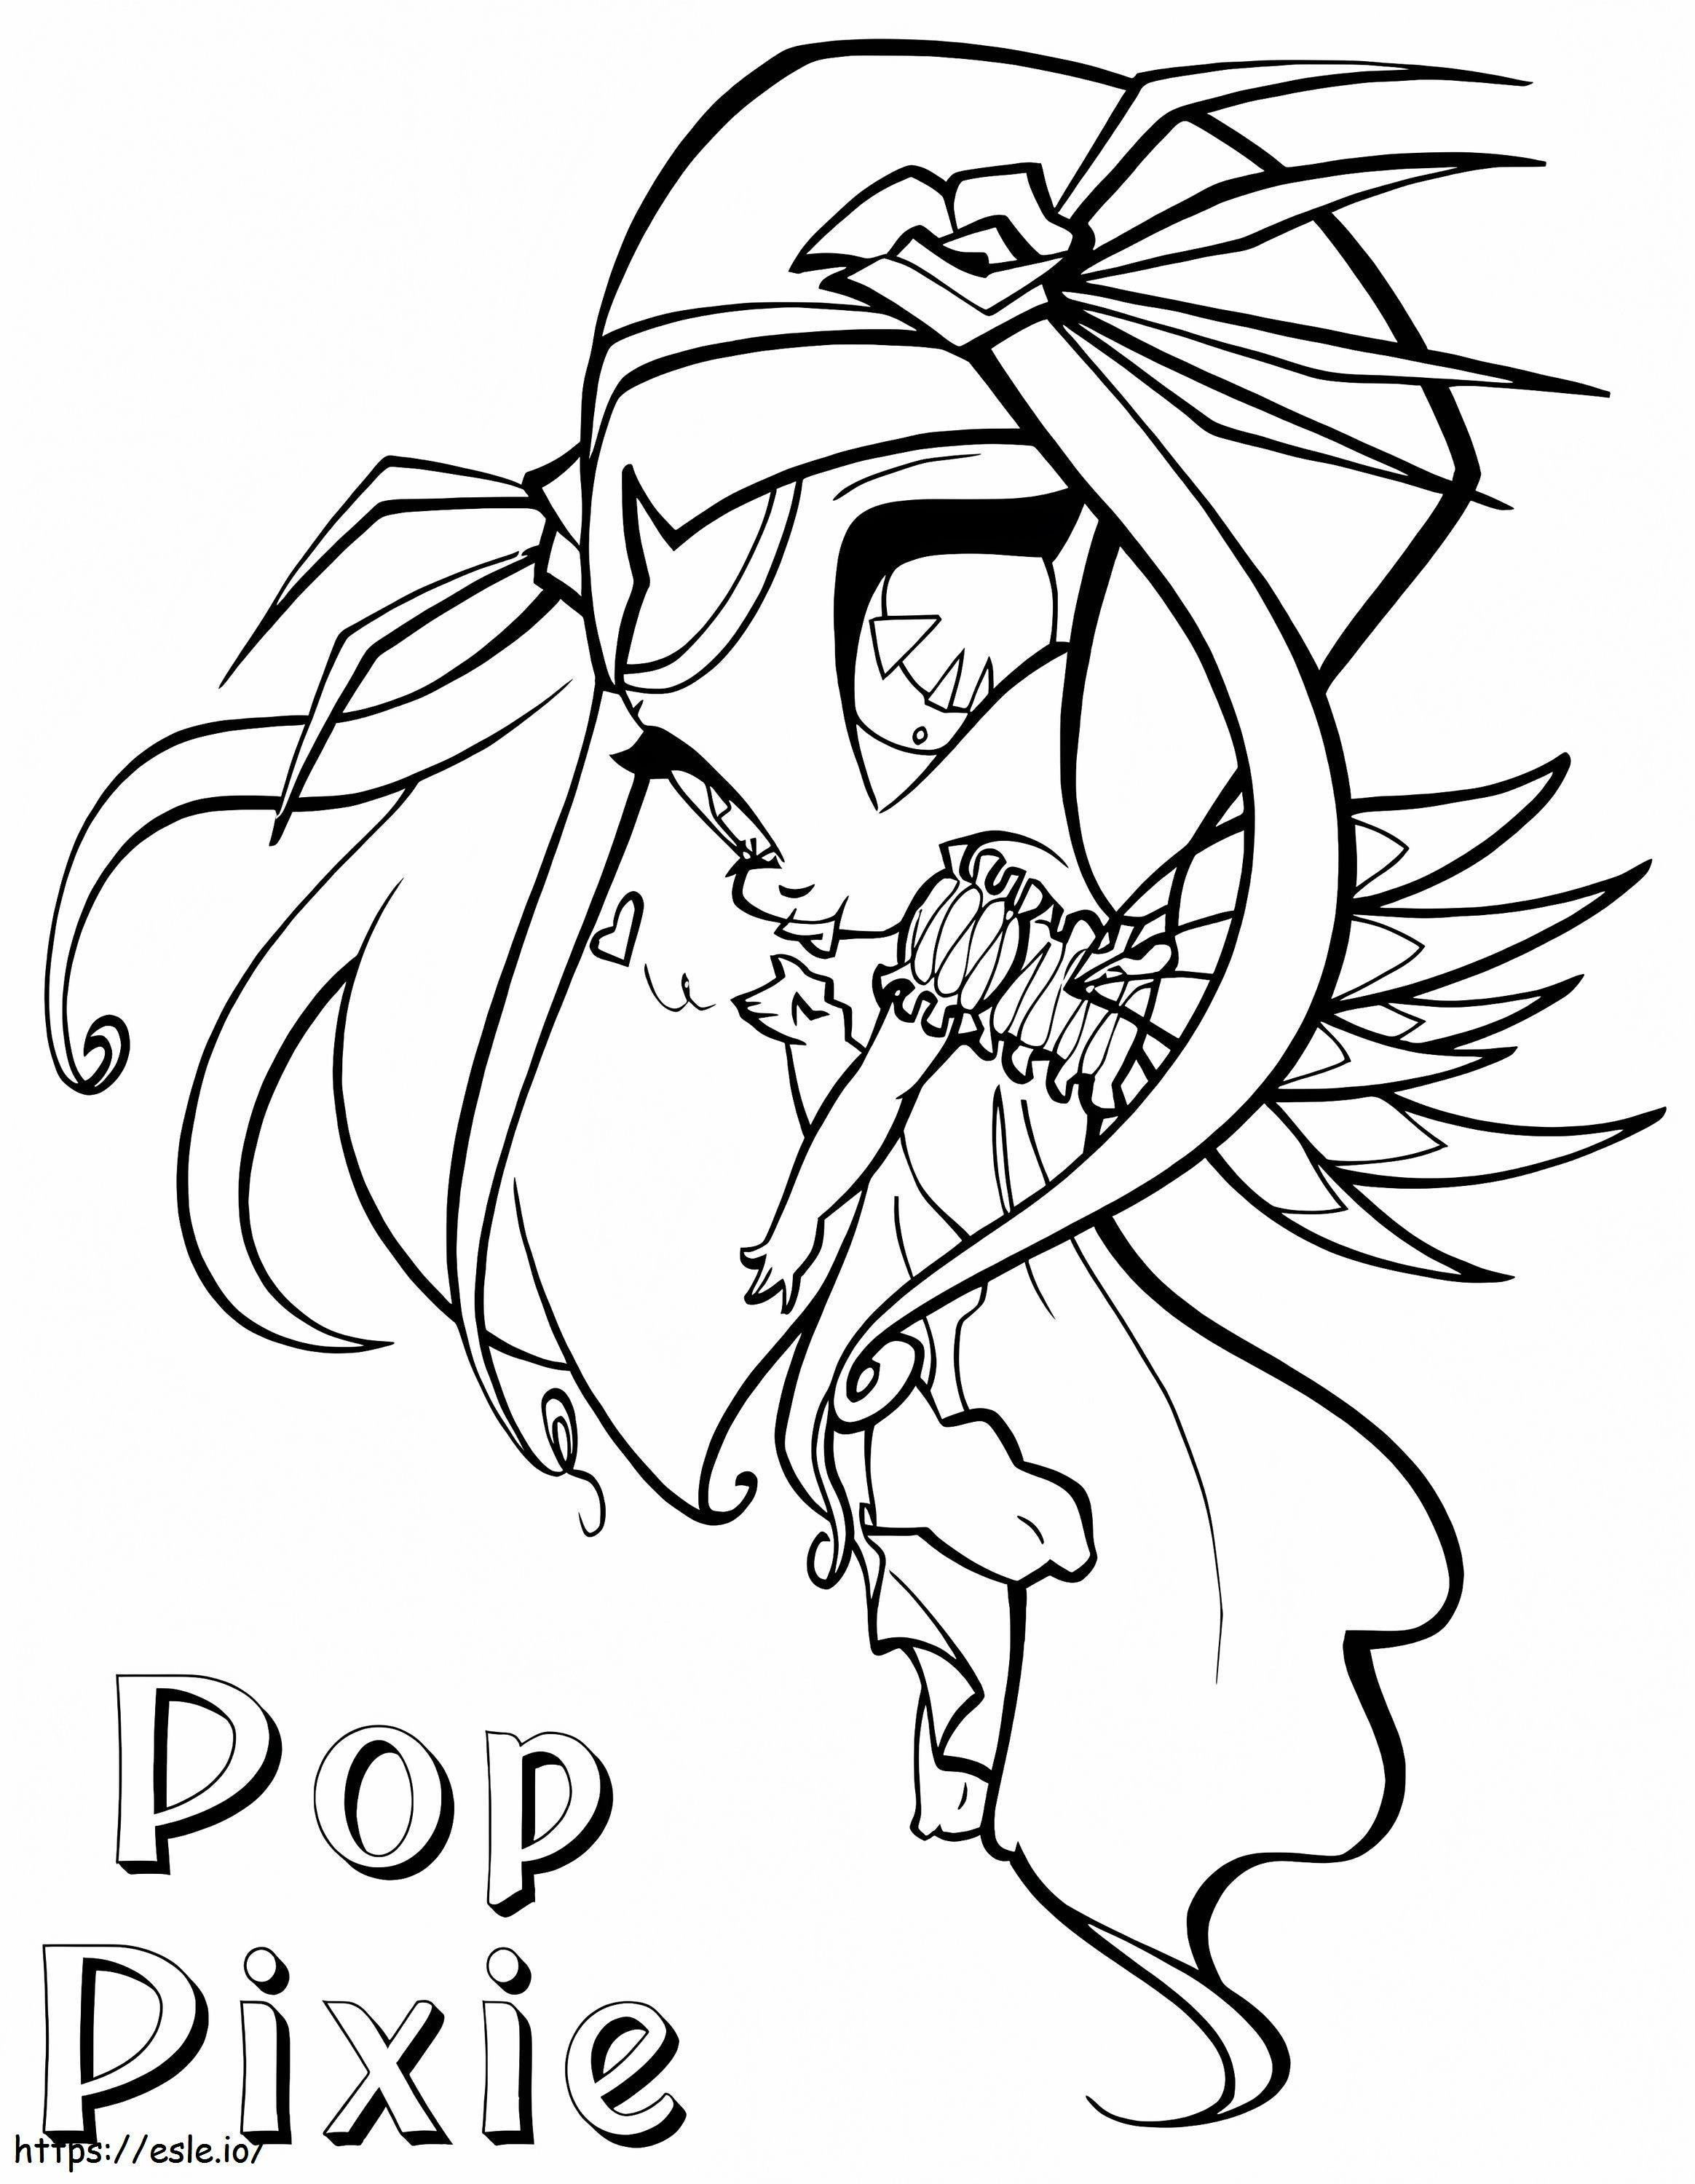 Cute Amore Pop Pixie coloring page